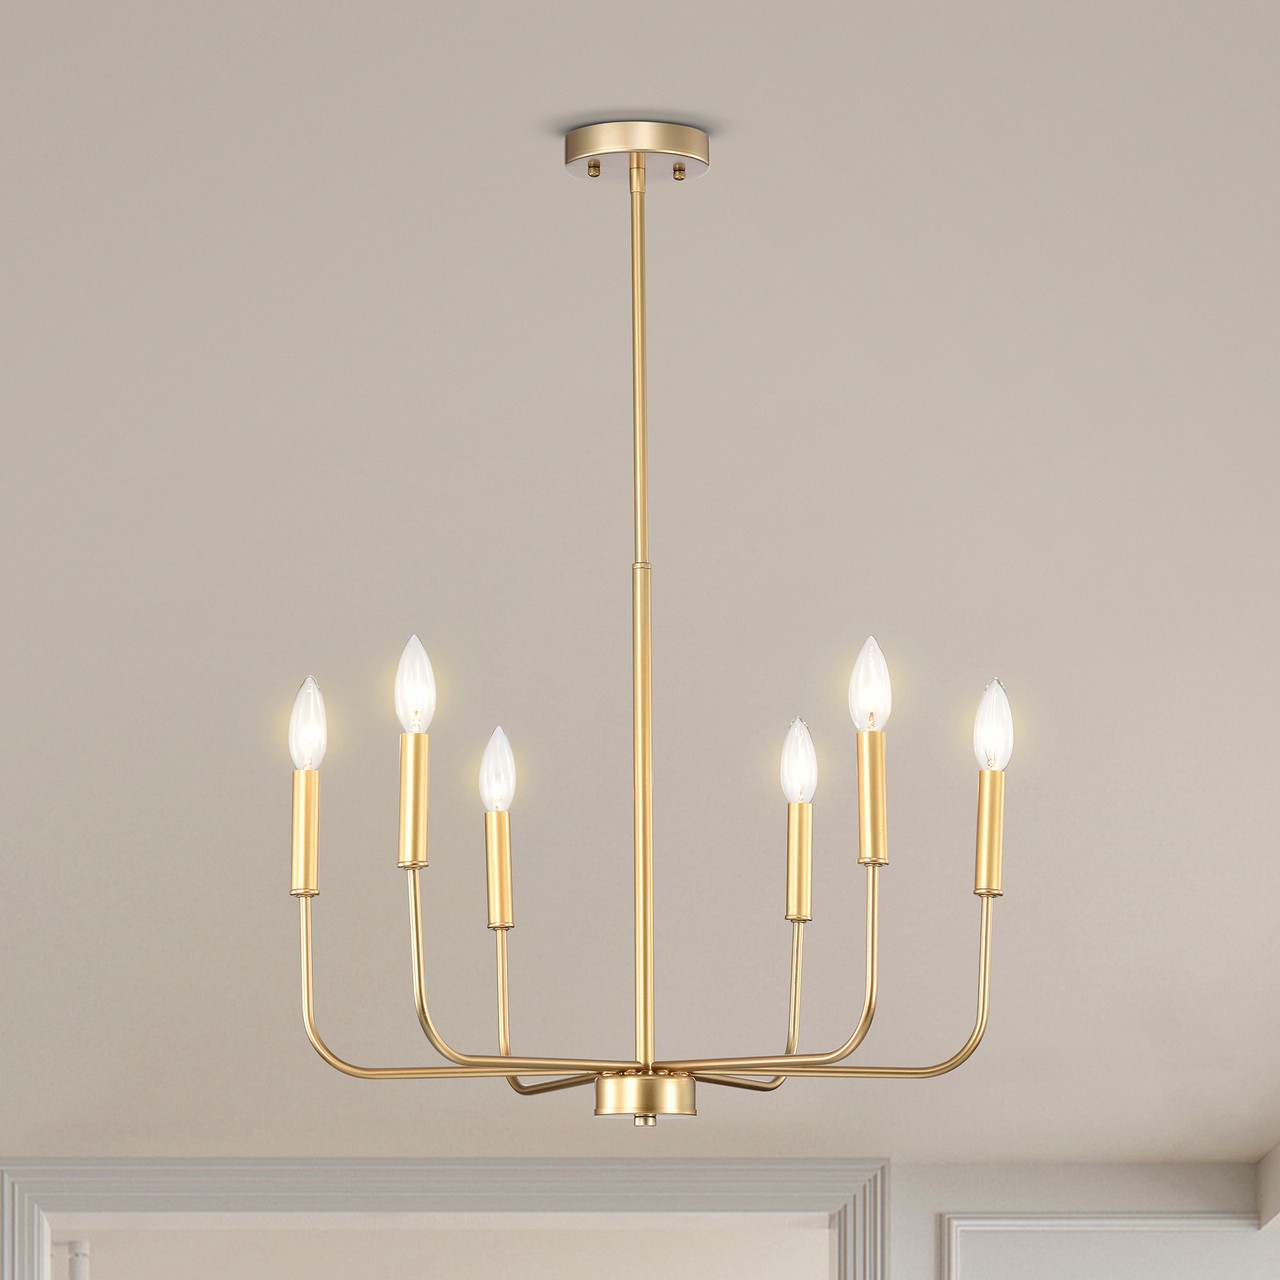 WAREHOUSE OF TIFFANY'S GD01-39MG Triona 22.1 in. 6-Light Indoor Matte Gold Finish Chandelier with Light Kit